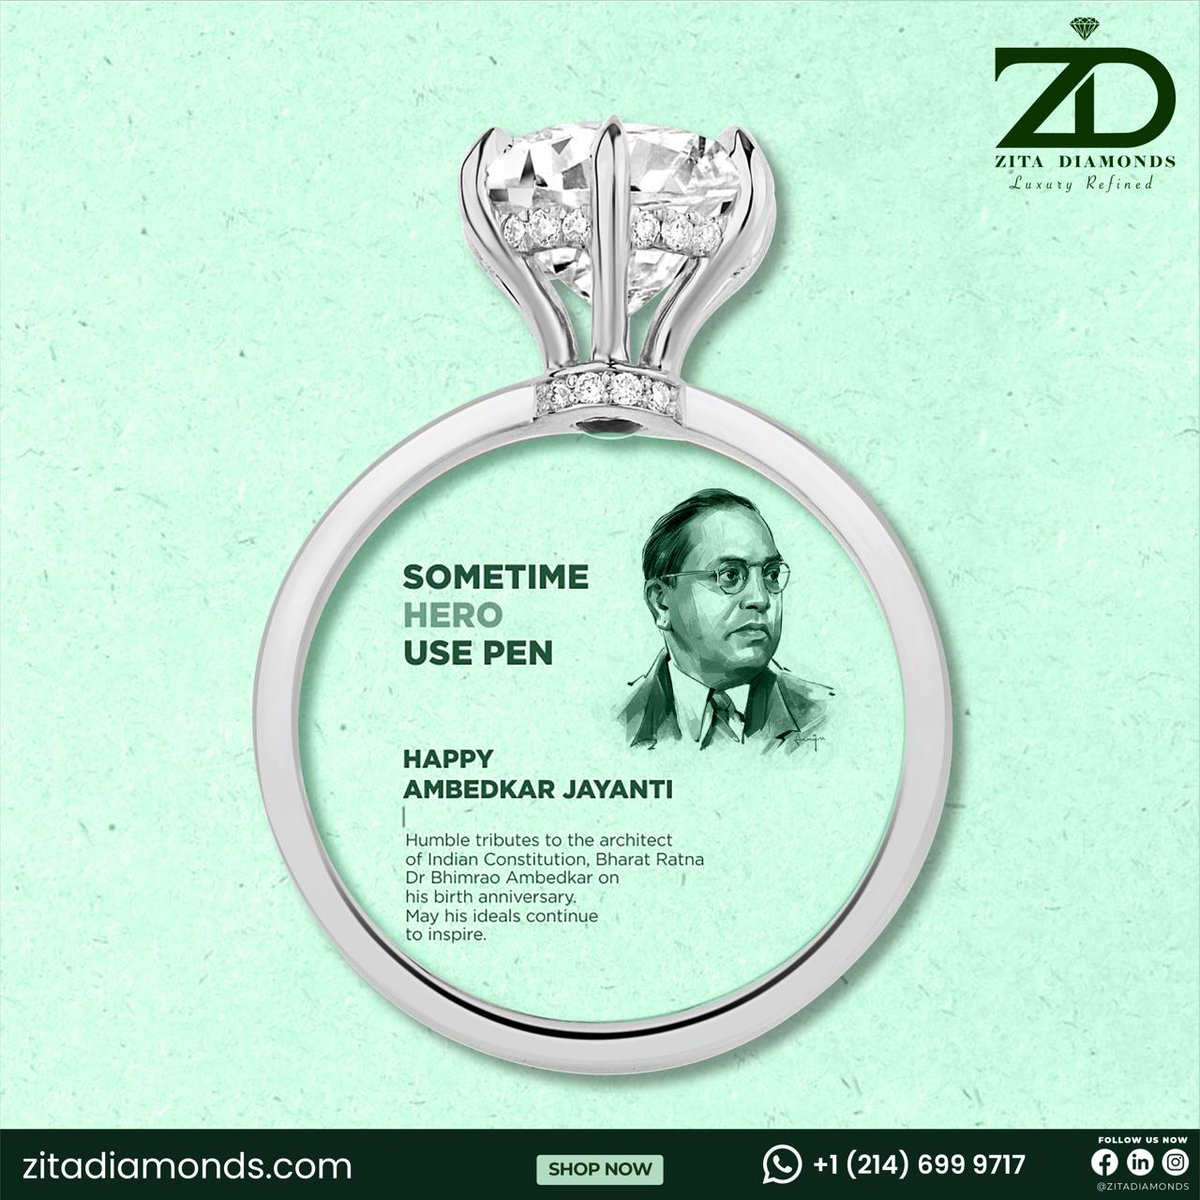 Happy Ambedkar Jayanti to all celebrating in India! 🎉 

Visit our shop at zitadiamonds.com

#LabGrownDiamonds #ZitaDiamonds #DiamondRings